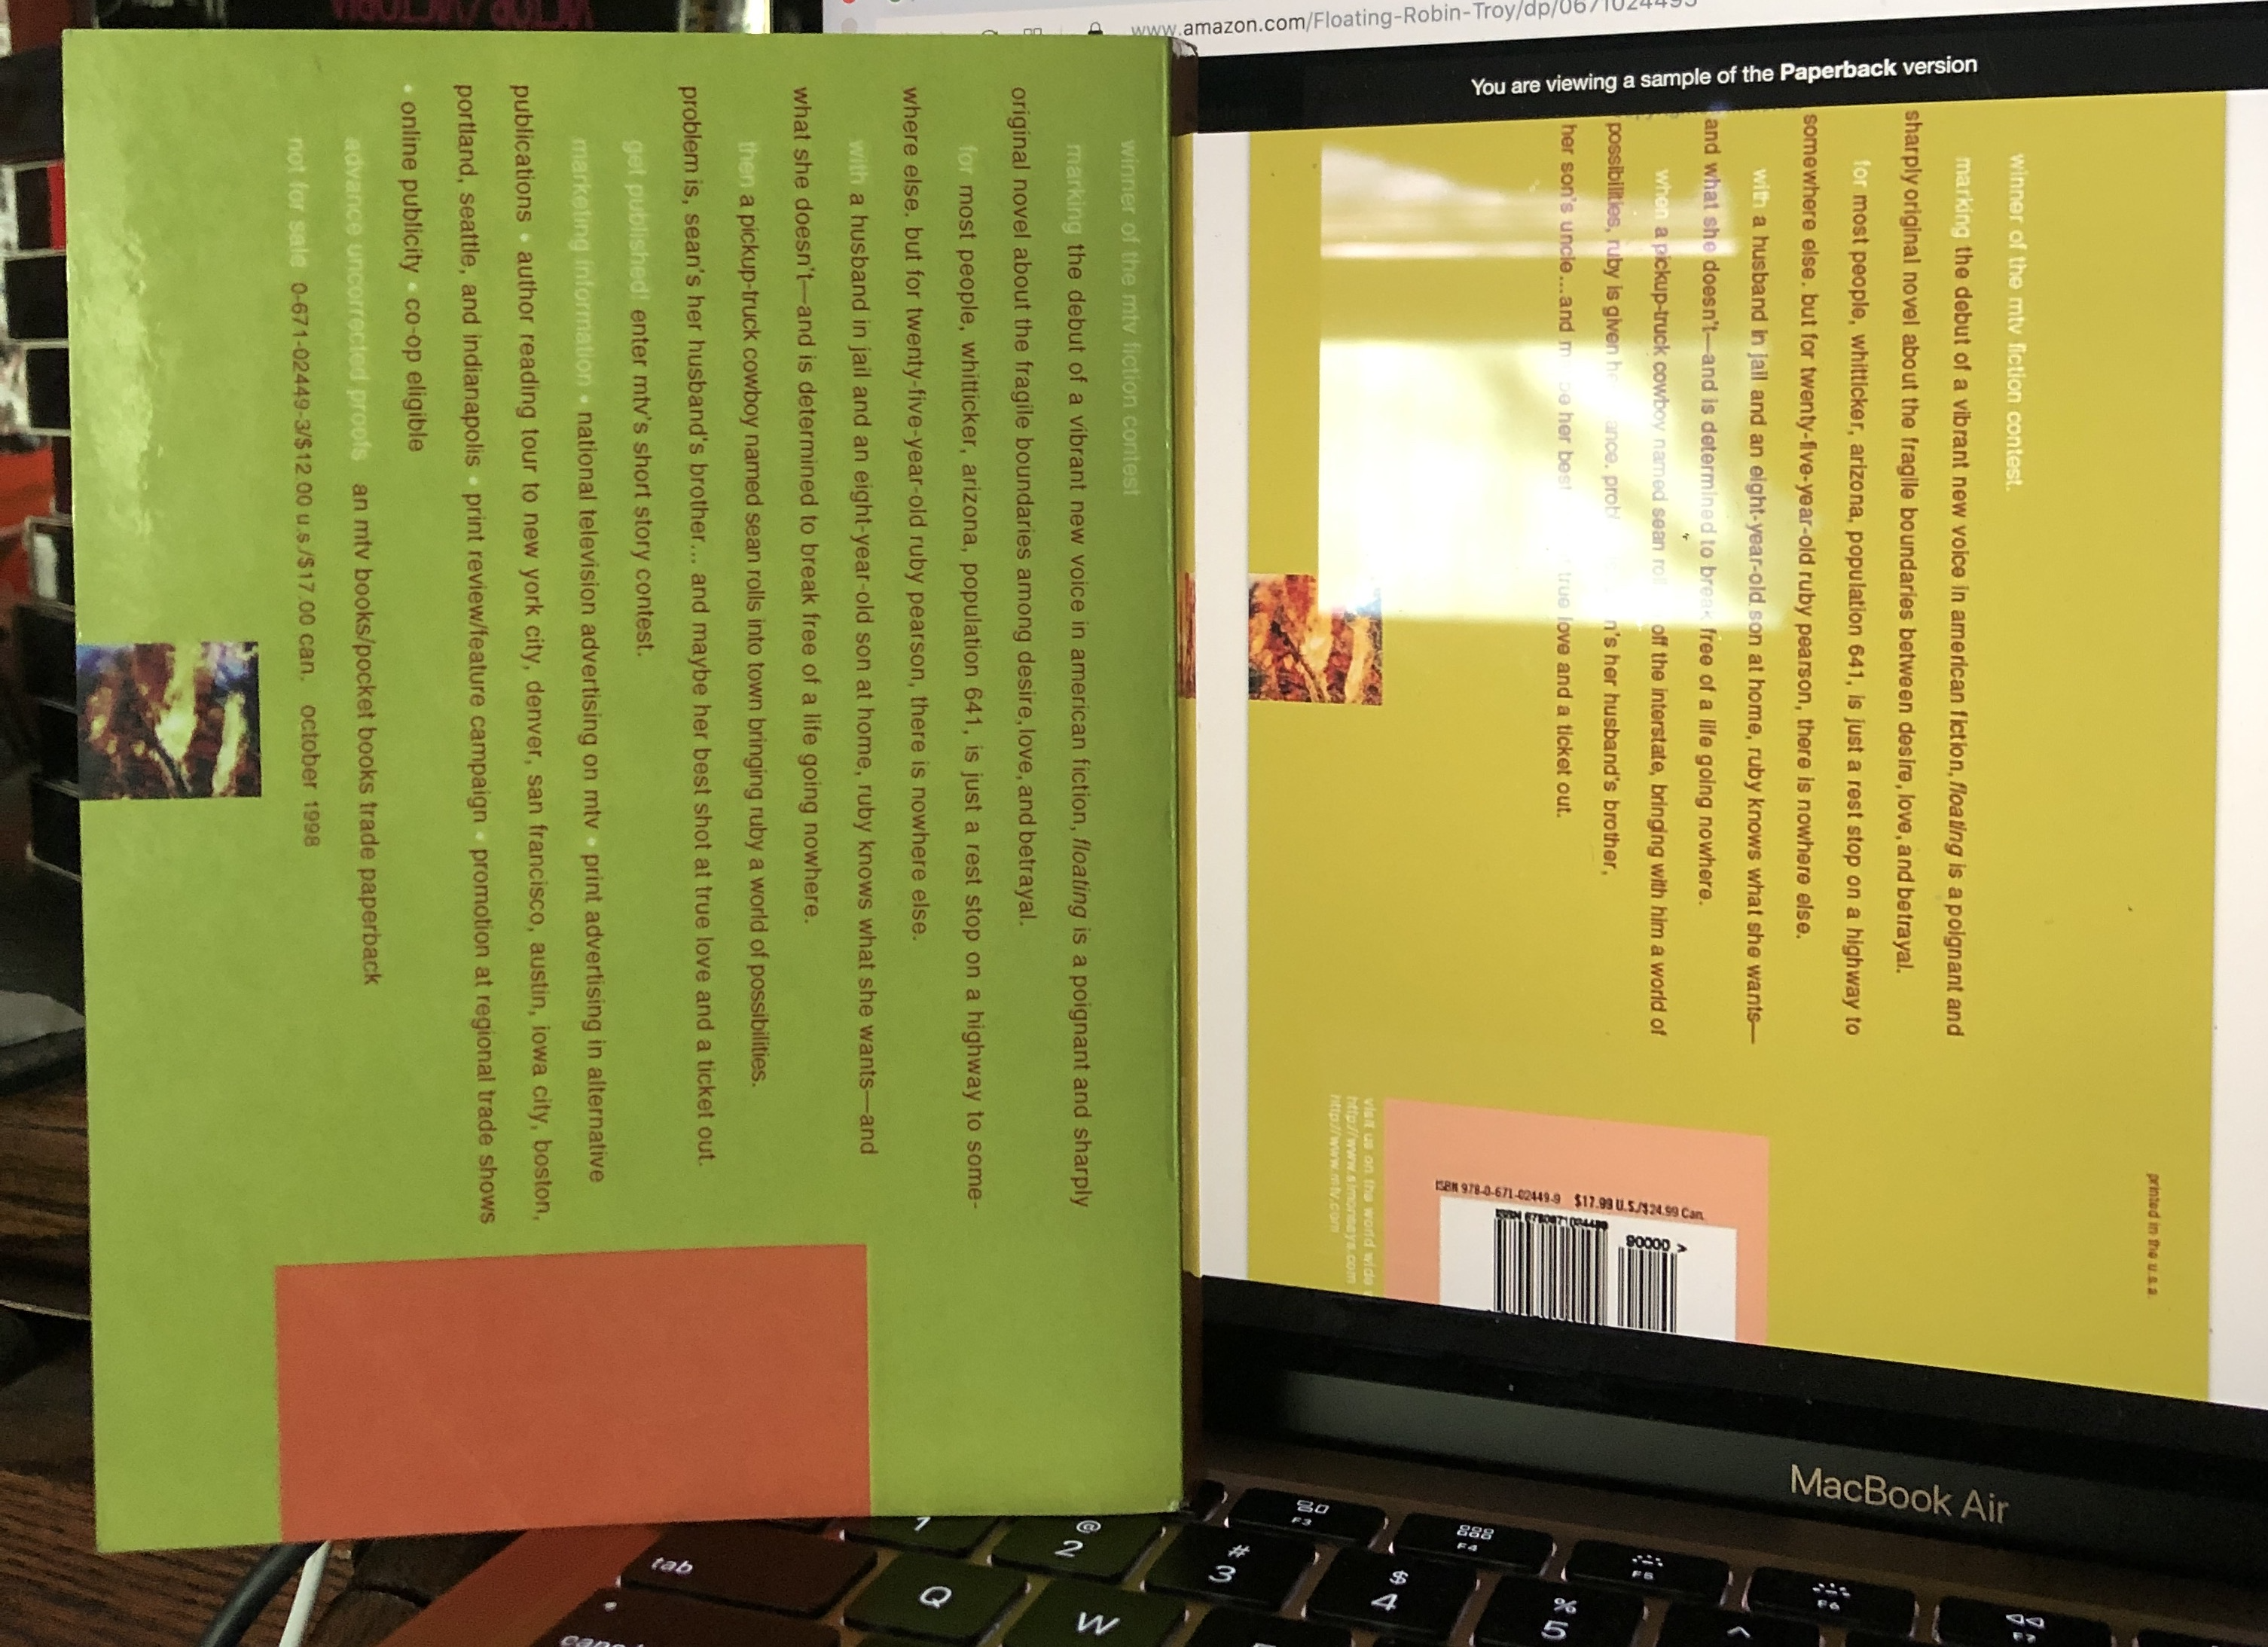 The back cover of a book next to a computer screen with the same back cover of that book on it featuring horizontal text.